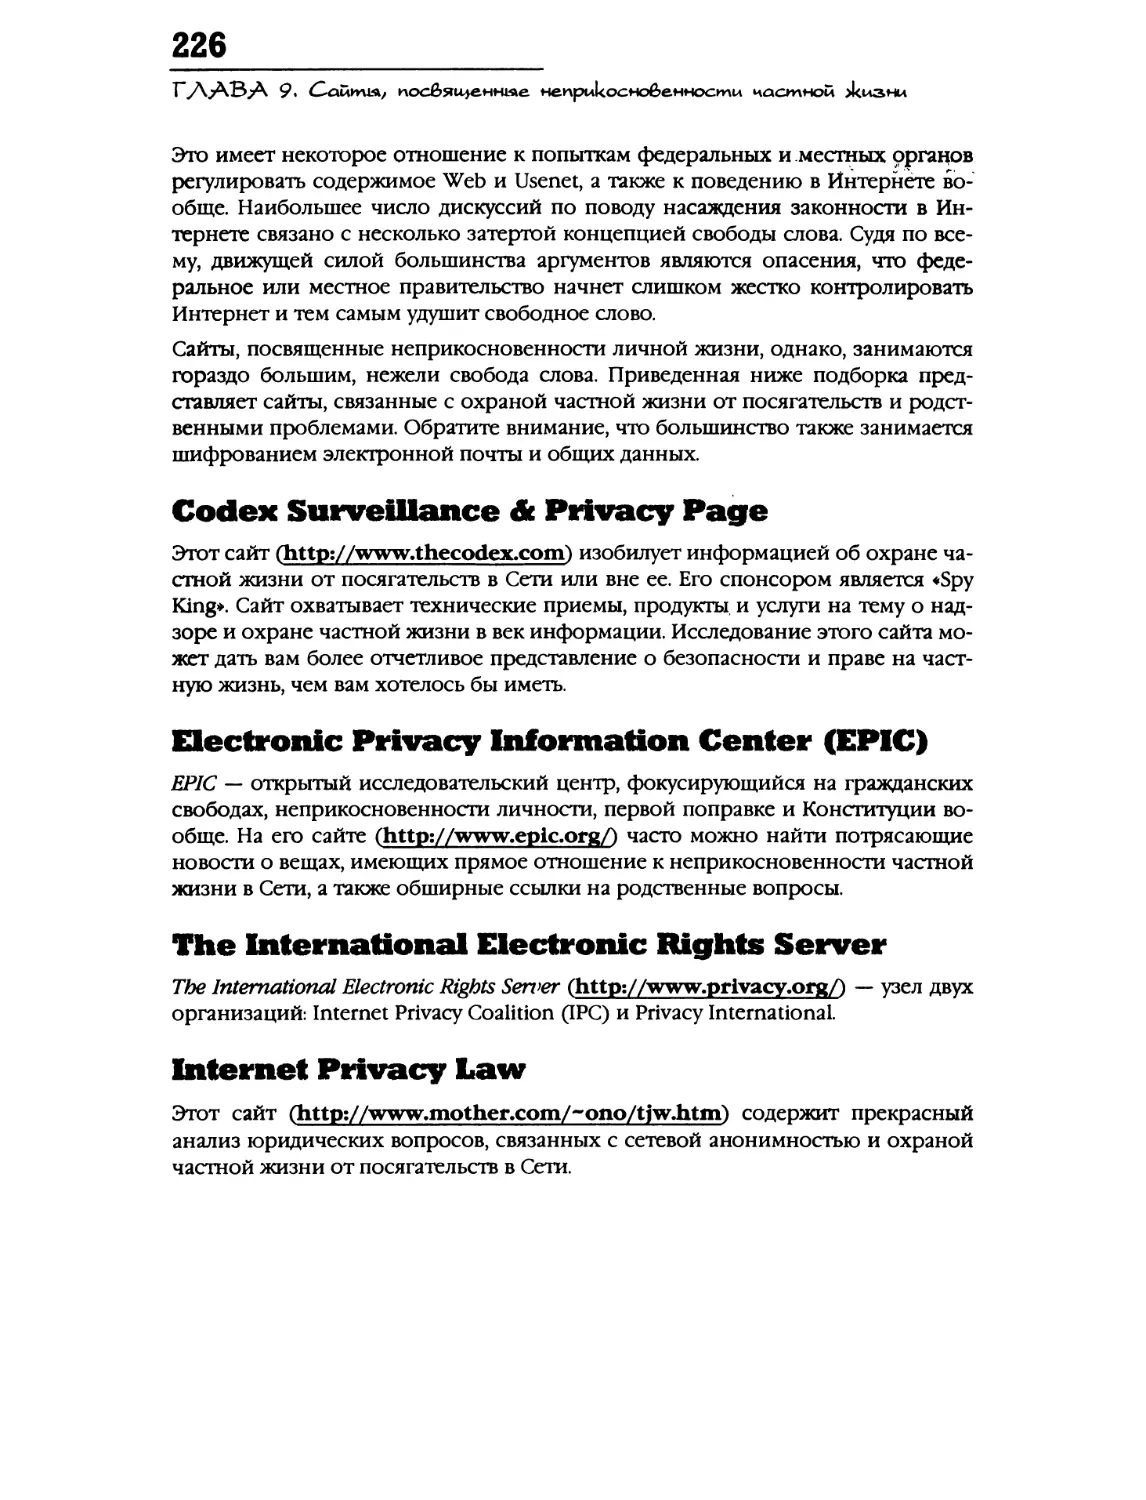 The International Electronic Rights Server
Internet Privacy Law